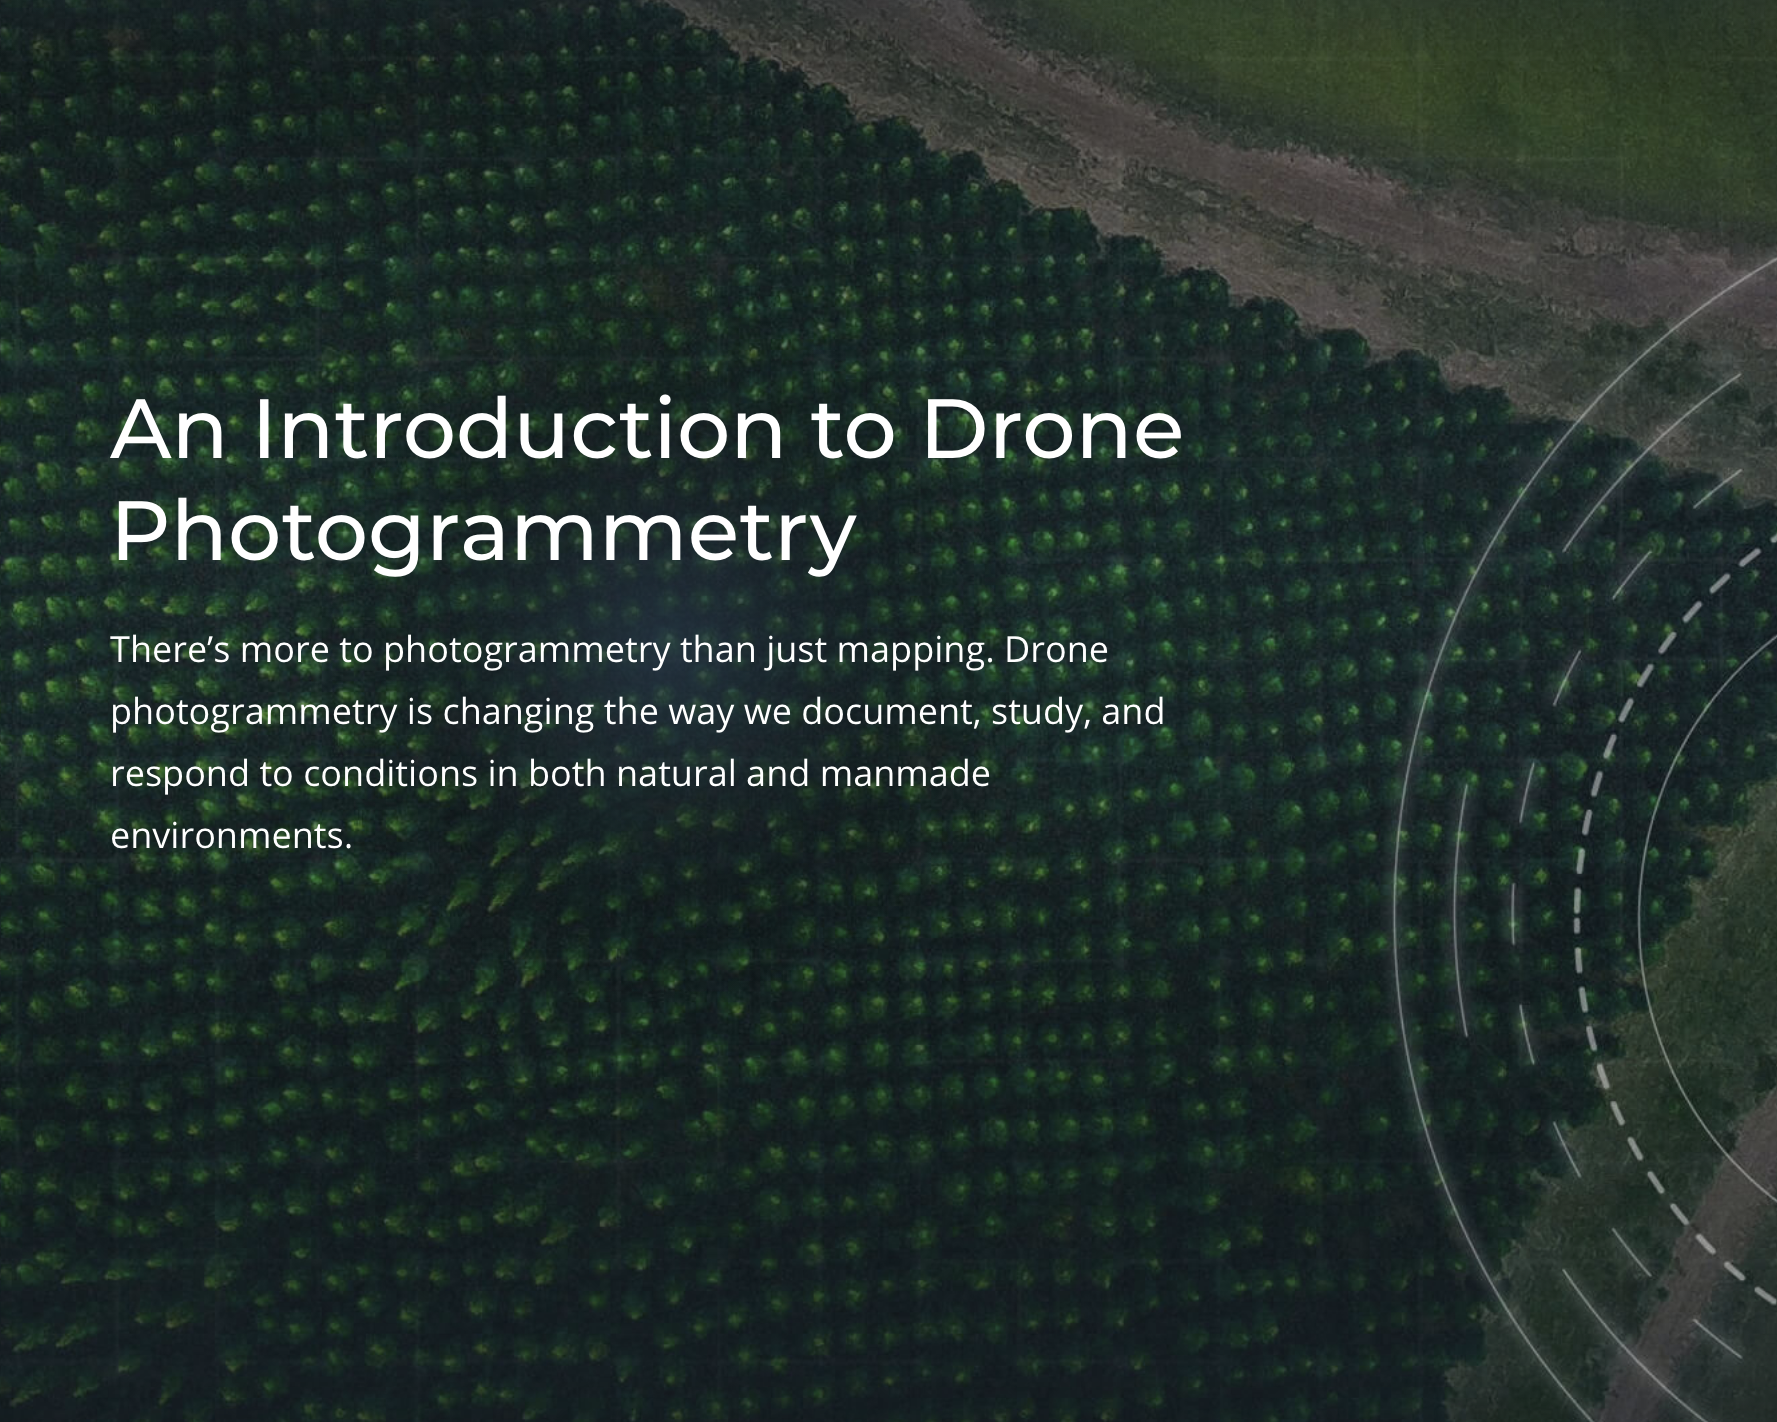 An Introduction to Drone Photogrammetry